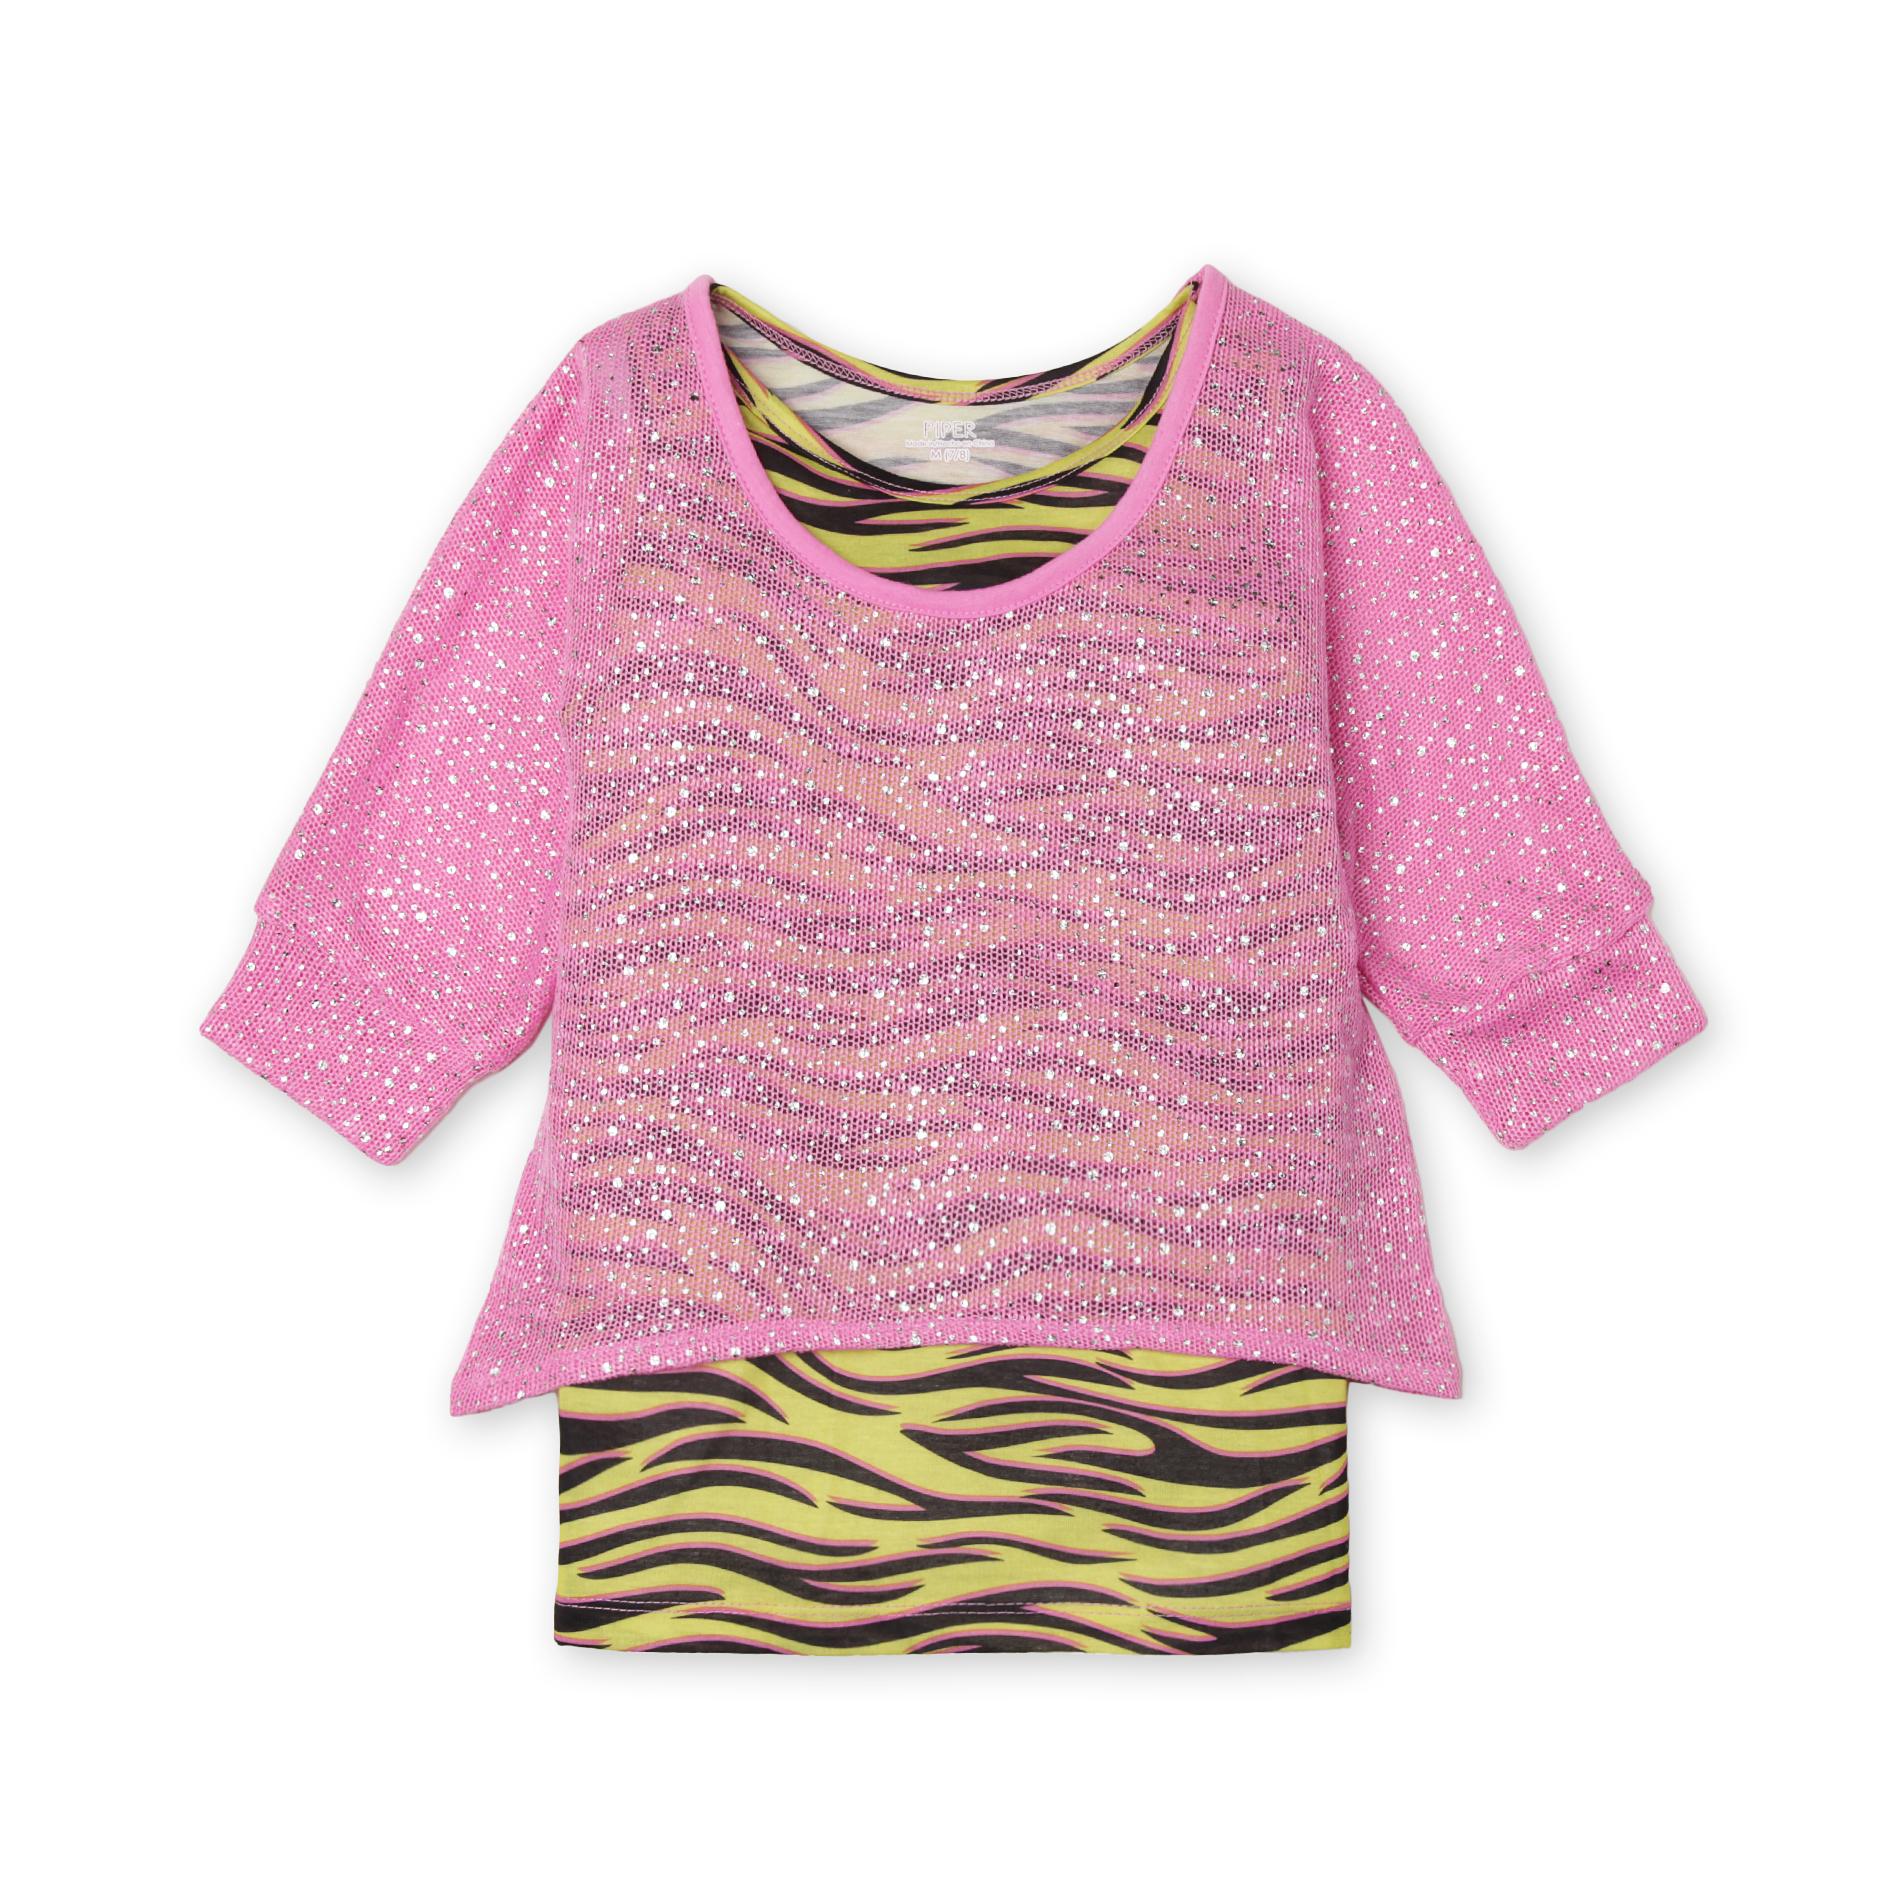 Piper Girl's Tank Top & Cropped Sweater - Tiger Print